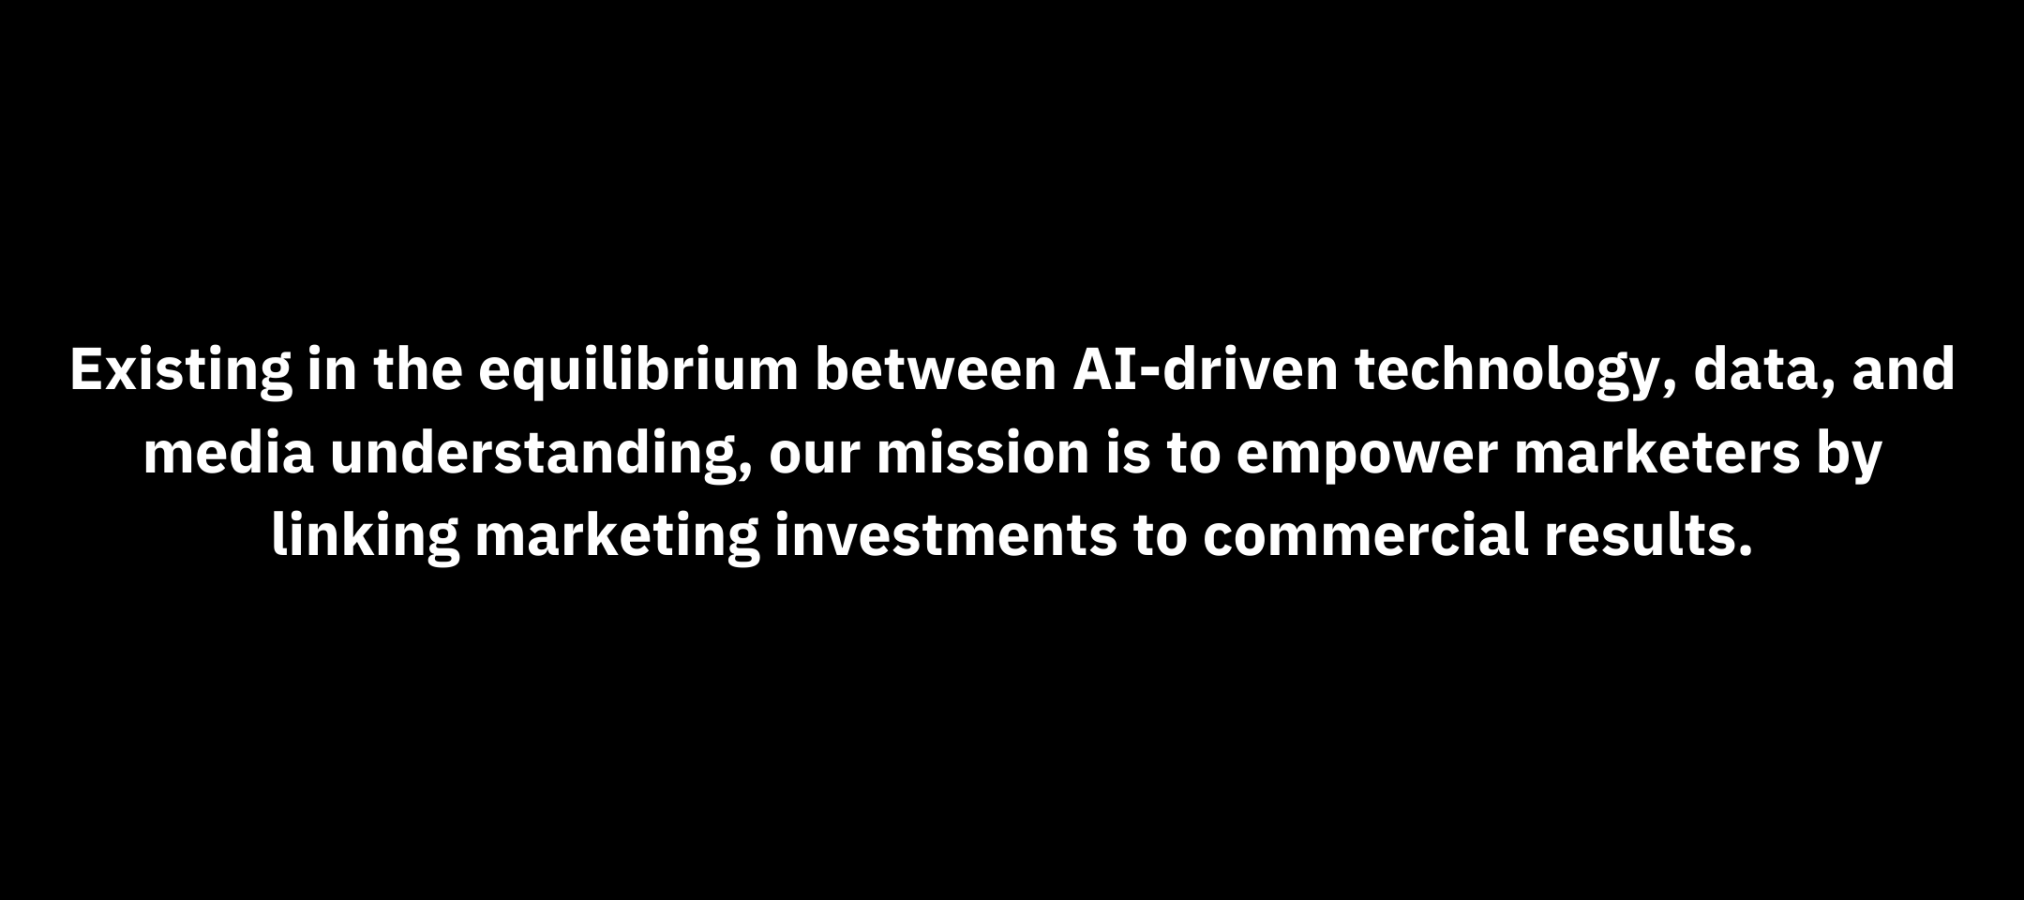 Existing in the equilibrium between AI-driven technology, data, and media understanding, our mission is to empower marketers by linking marketing investments to commercial results.-2